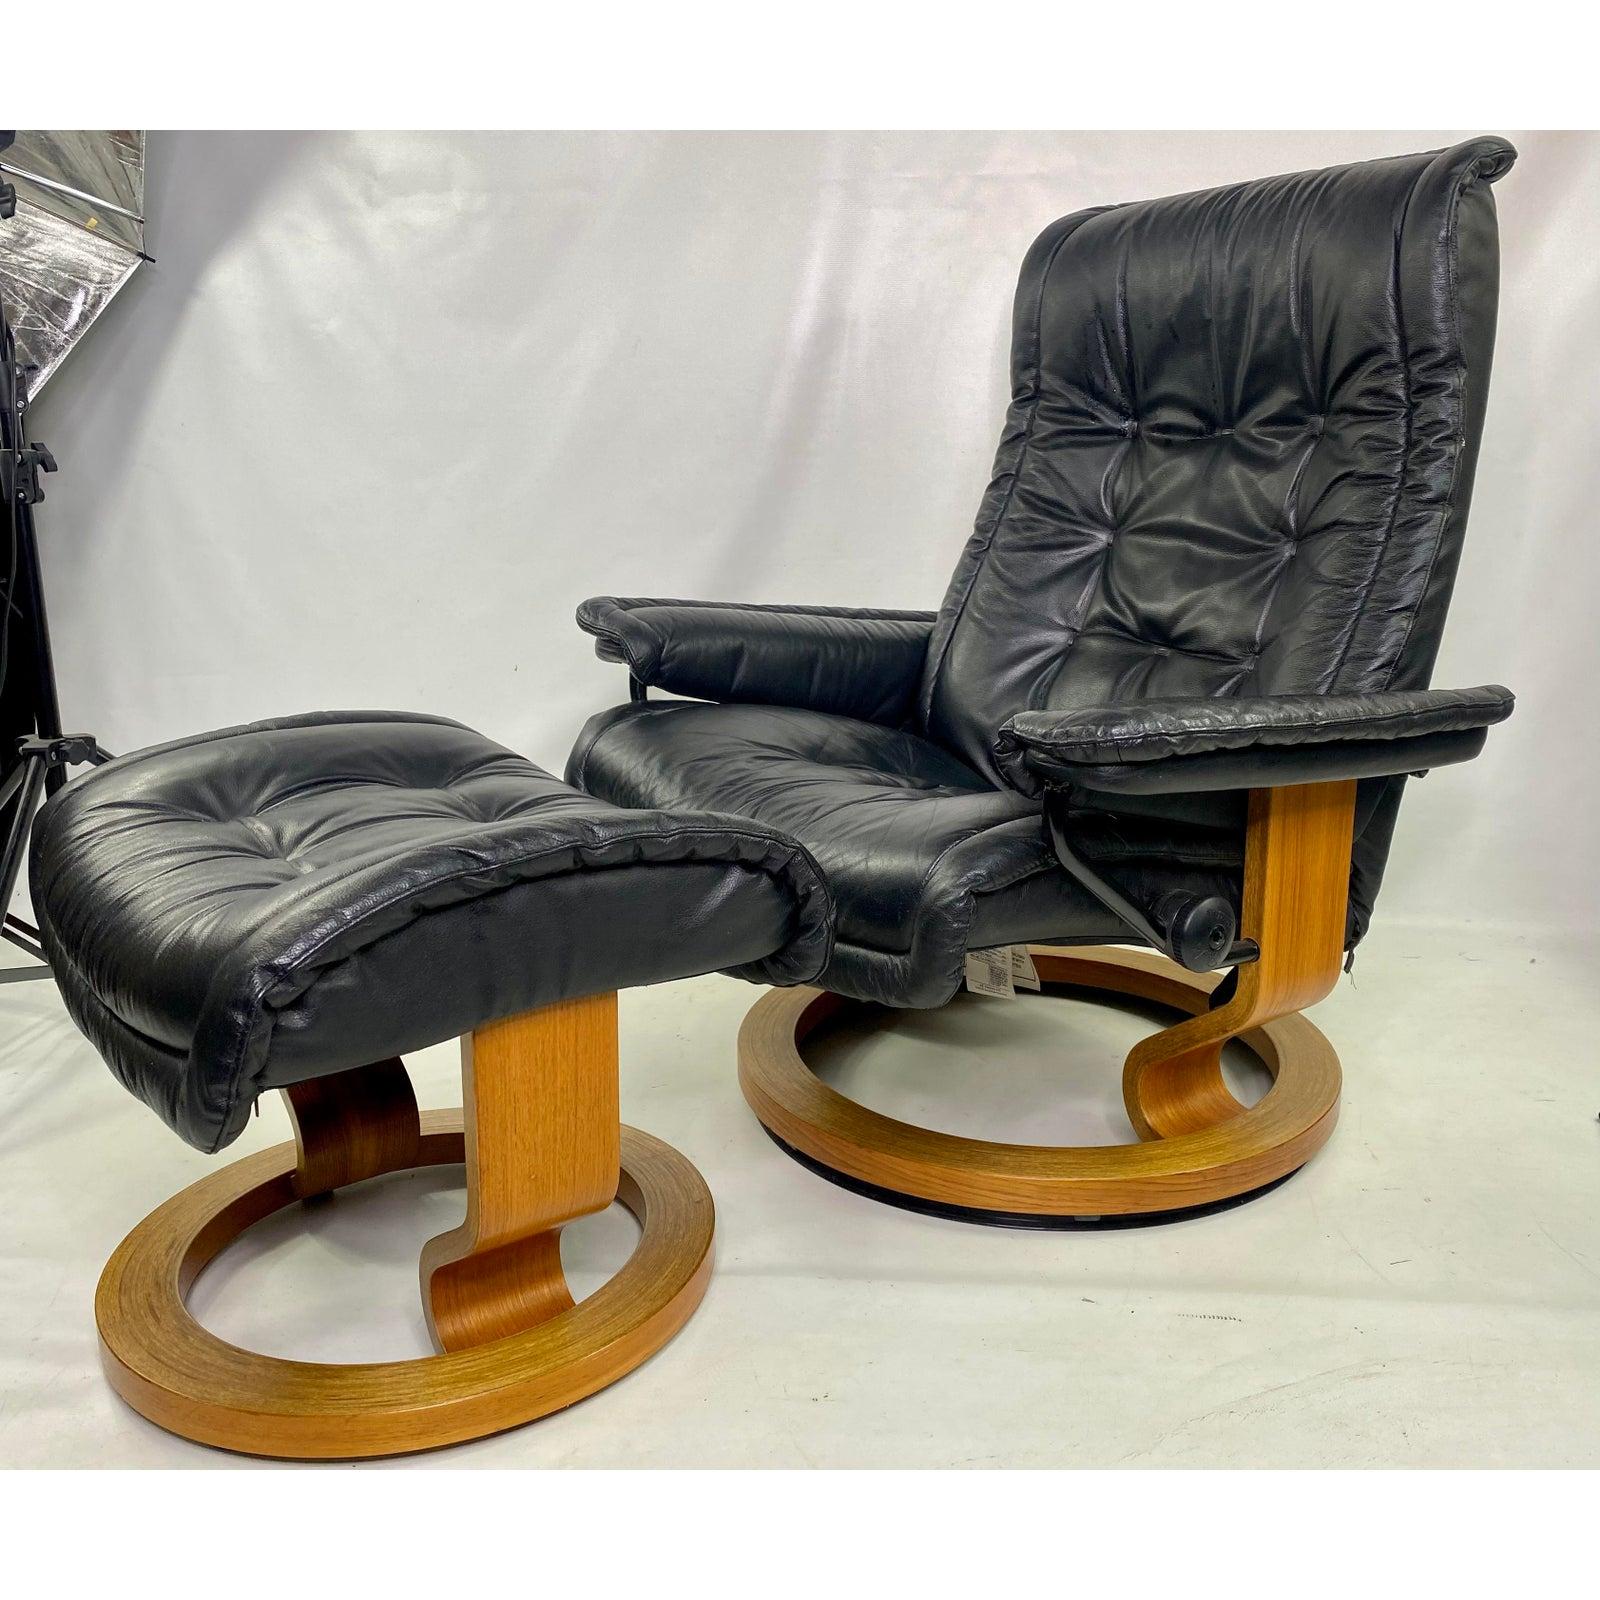 Stressless Recliner Chair And Ottoman, Leather Reclining Chair And Ottoman